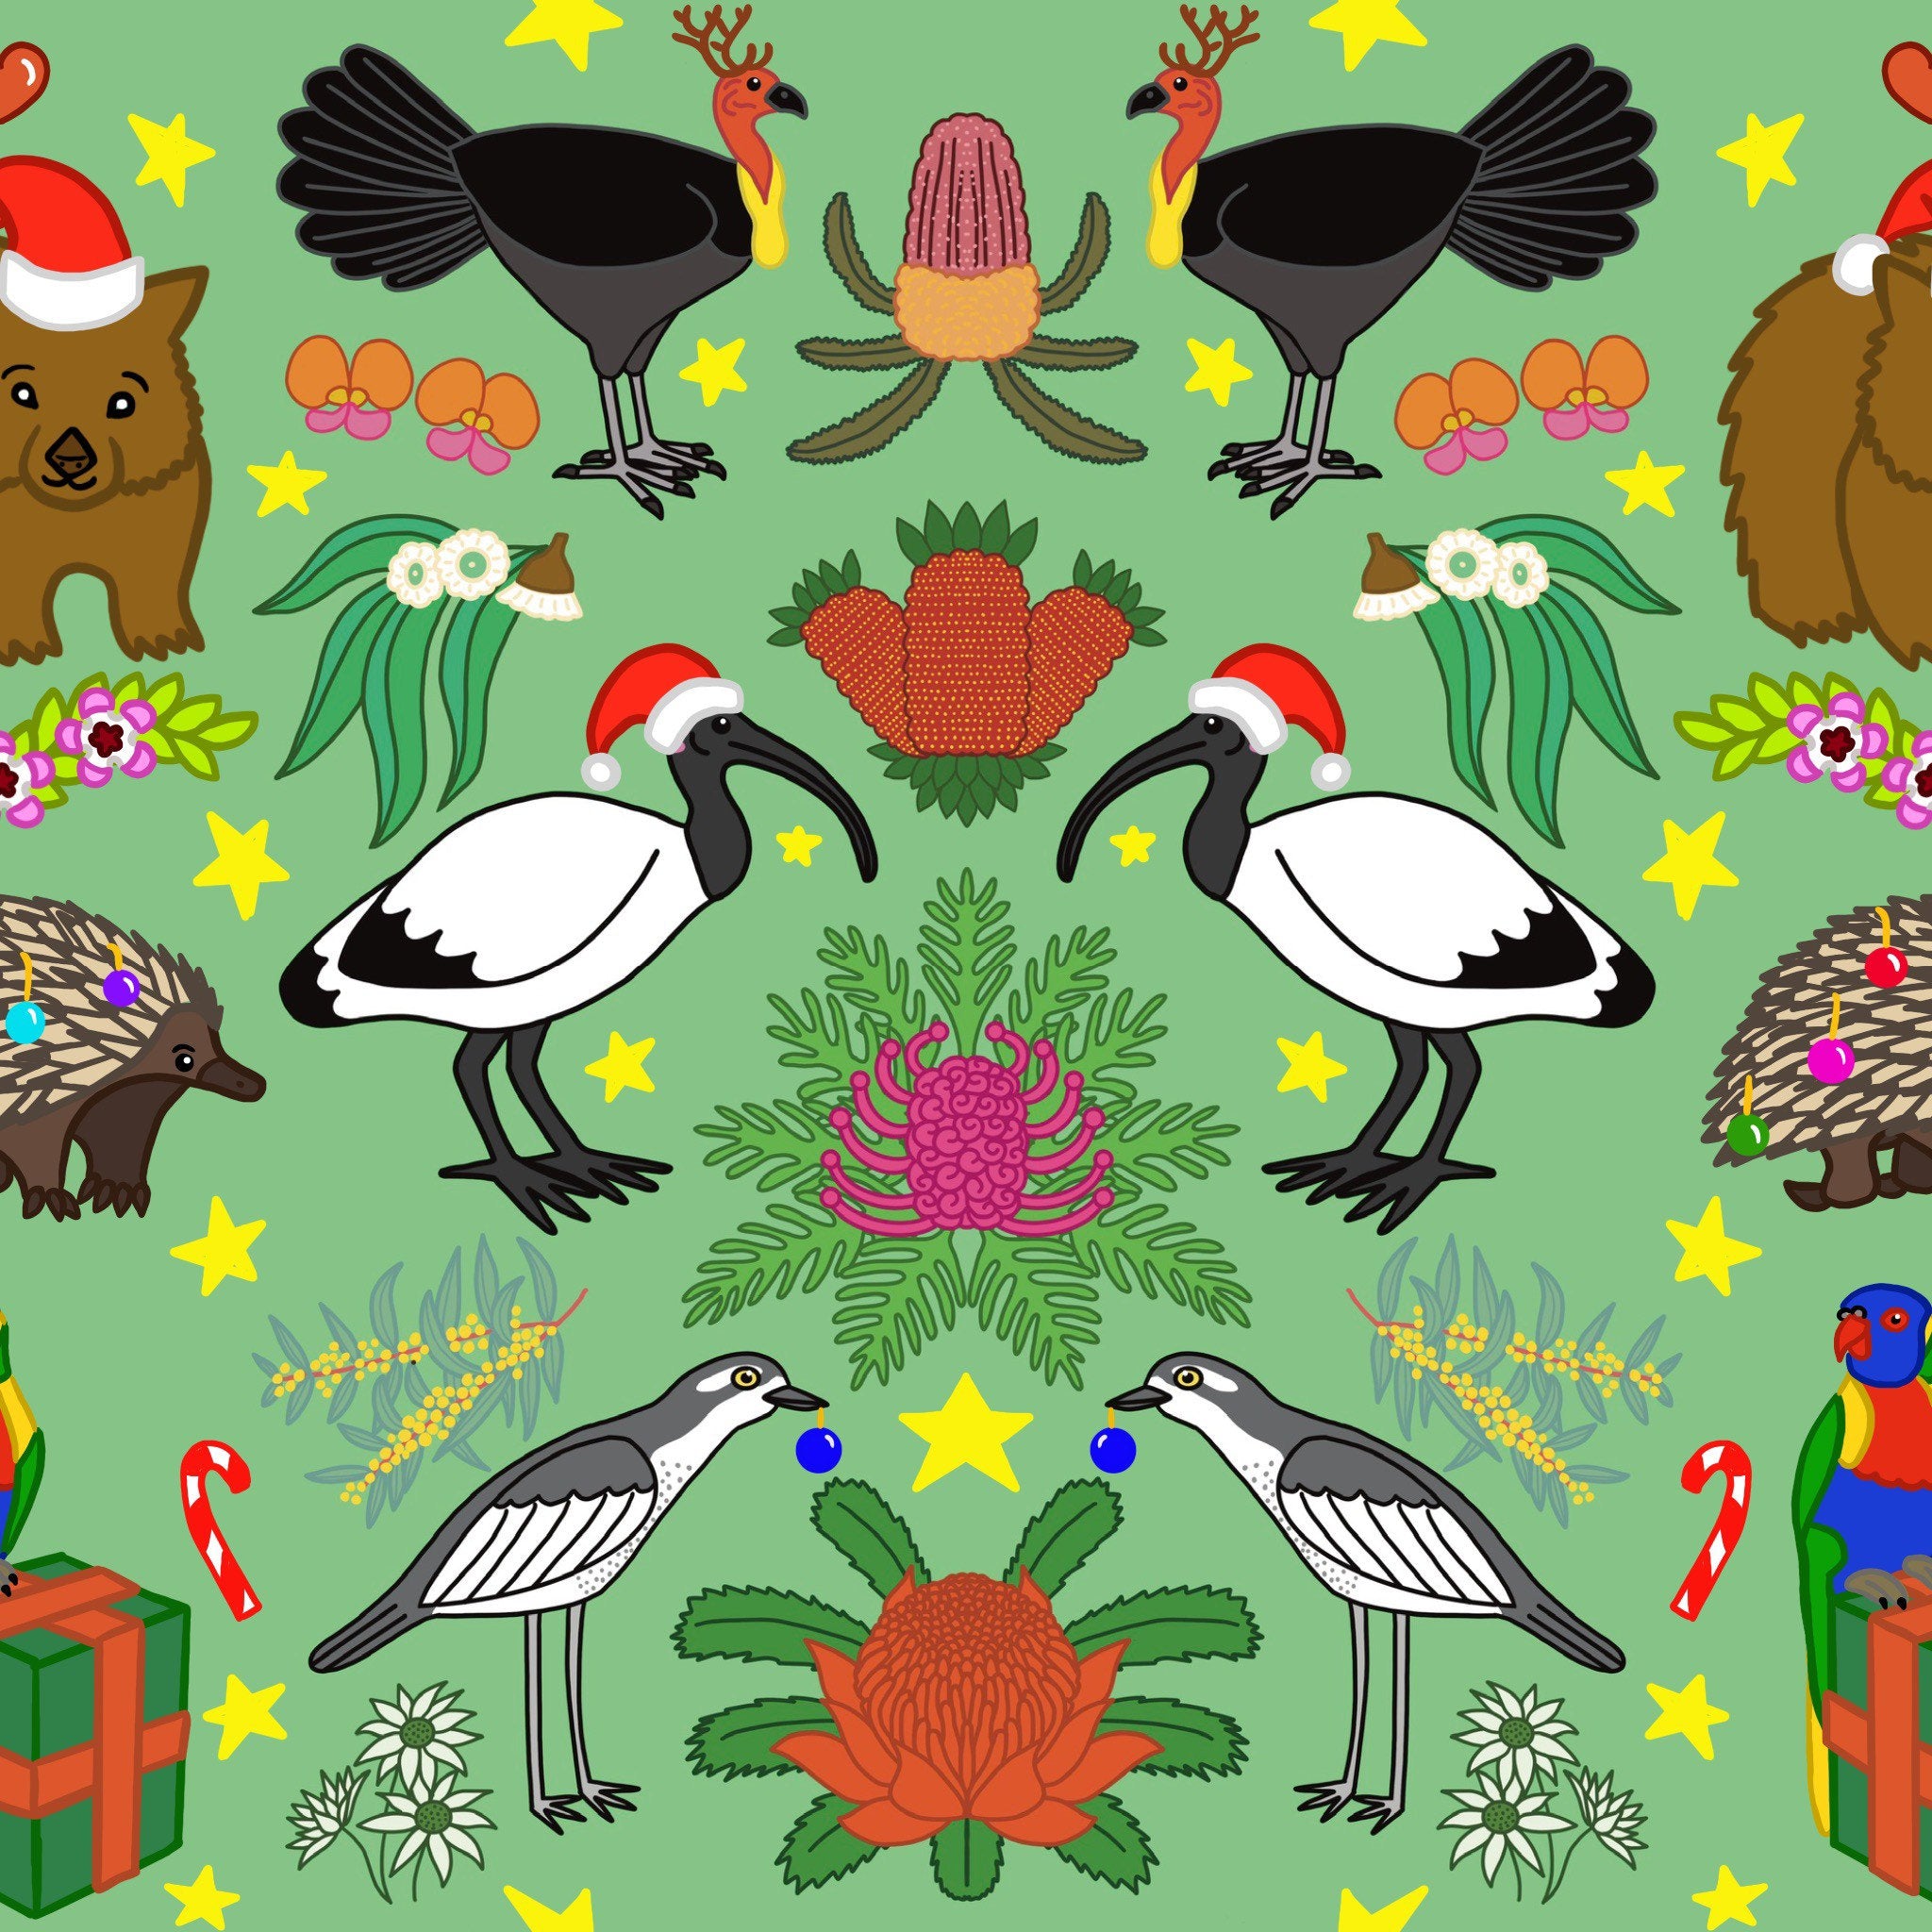 PREORDER - Aussie Christmas Wrapping Paper 70cm x 100cm - Designed by Brisbane Artist - Native Australian Animals and Birds and Flowers